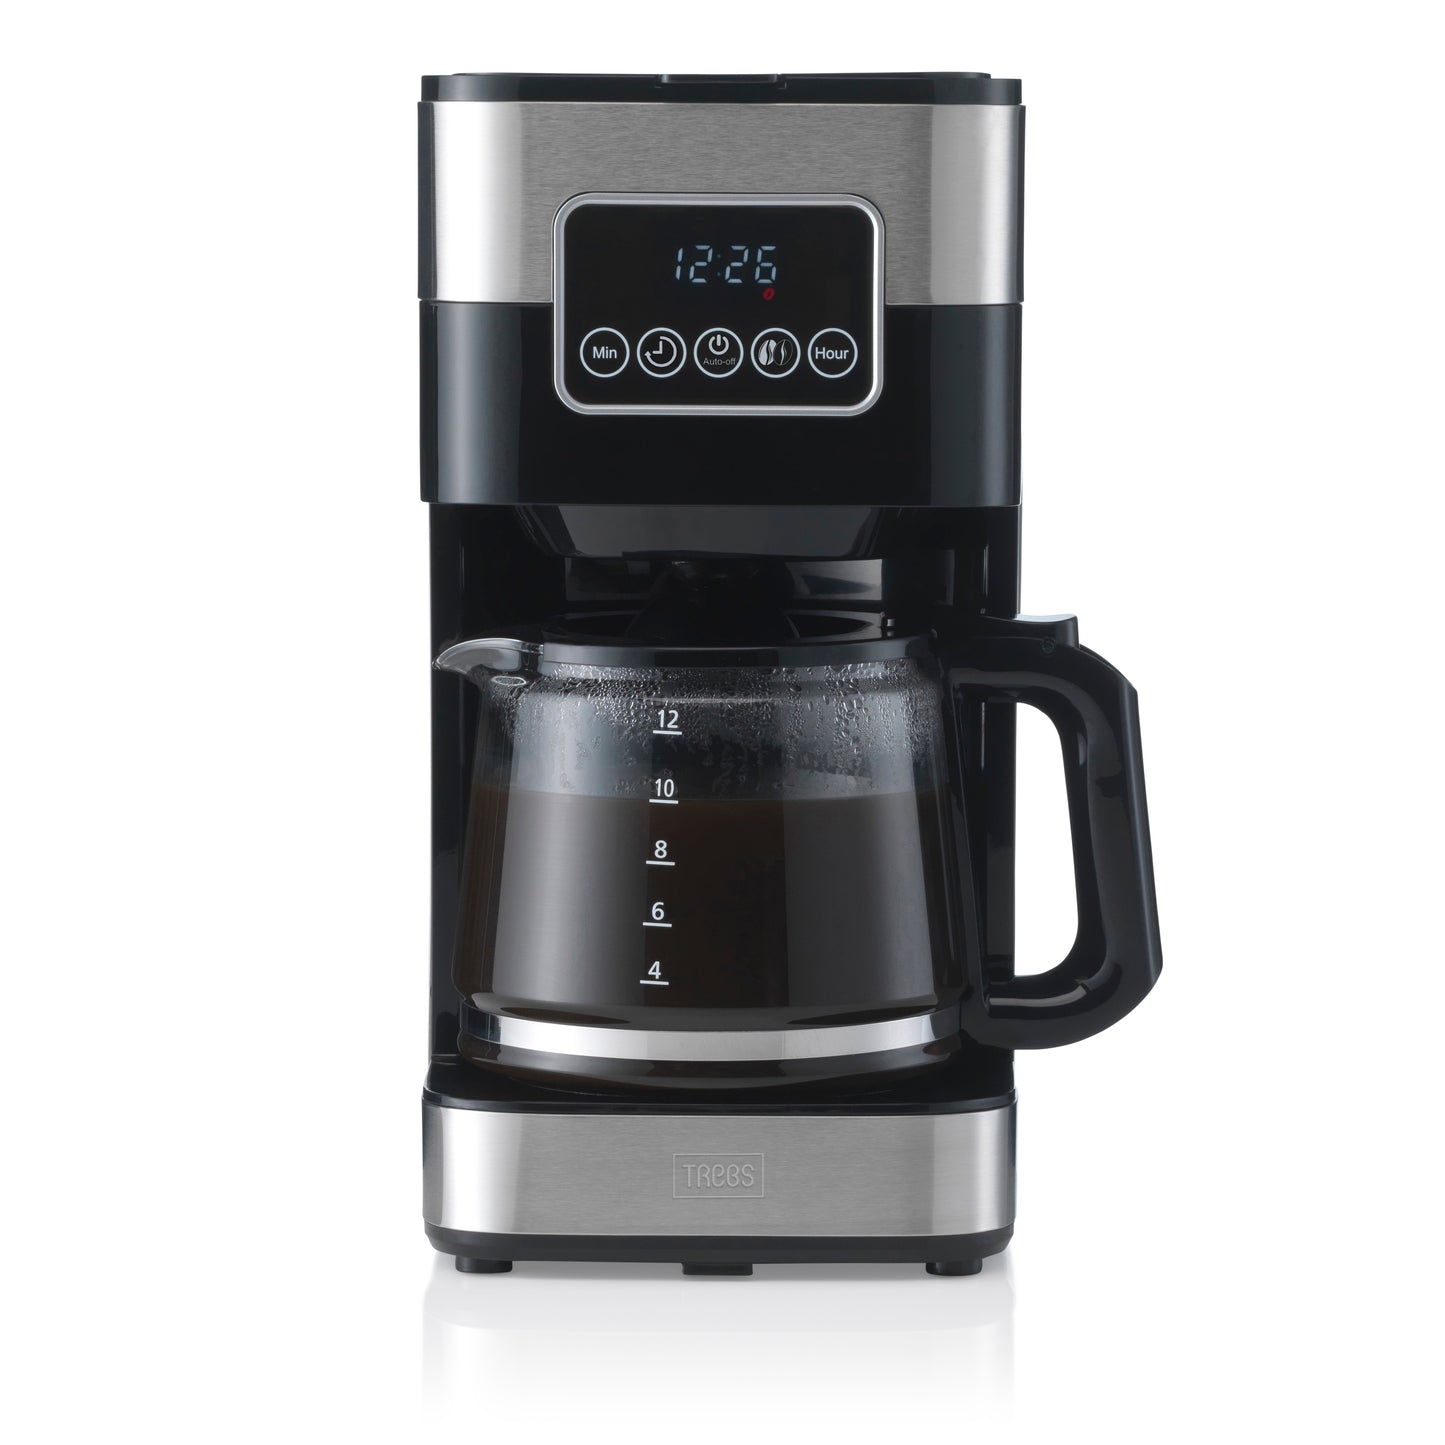 Trebs 24100 - Filter coffee maker - 1,5L - Stainless steel